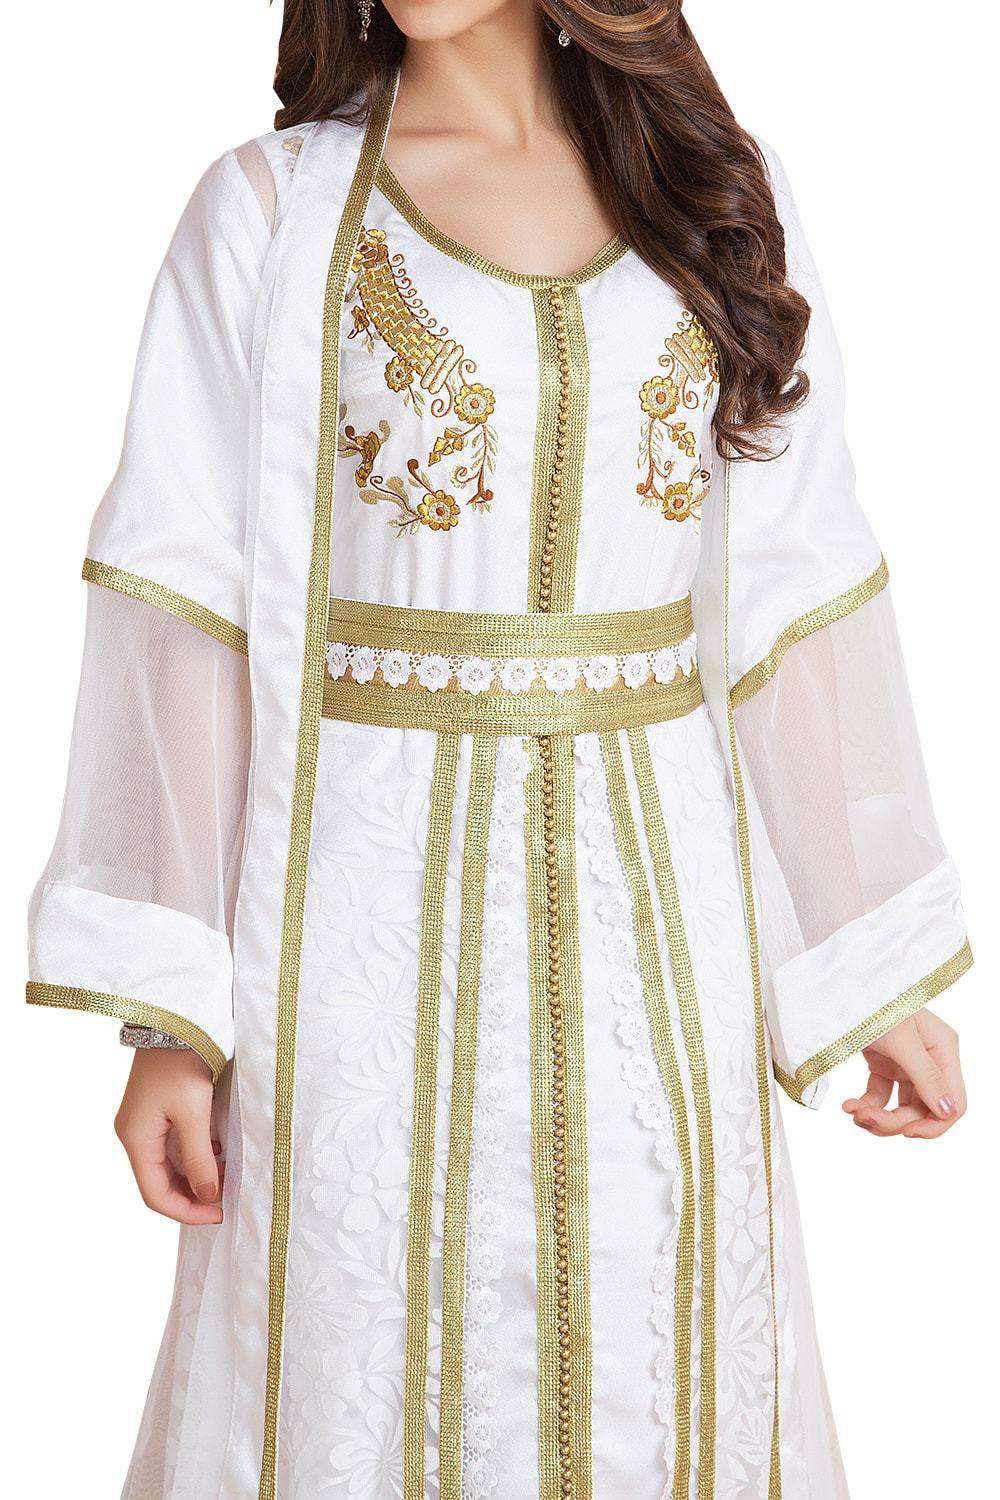 Trendy Beautiful White Color Party Wear and Jacket Style Dubai Moroccan Kaftan